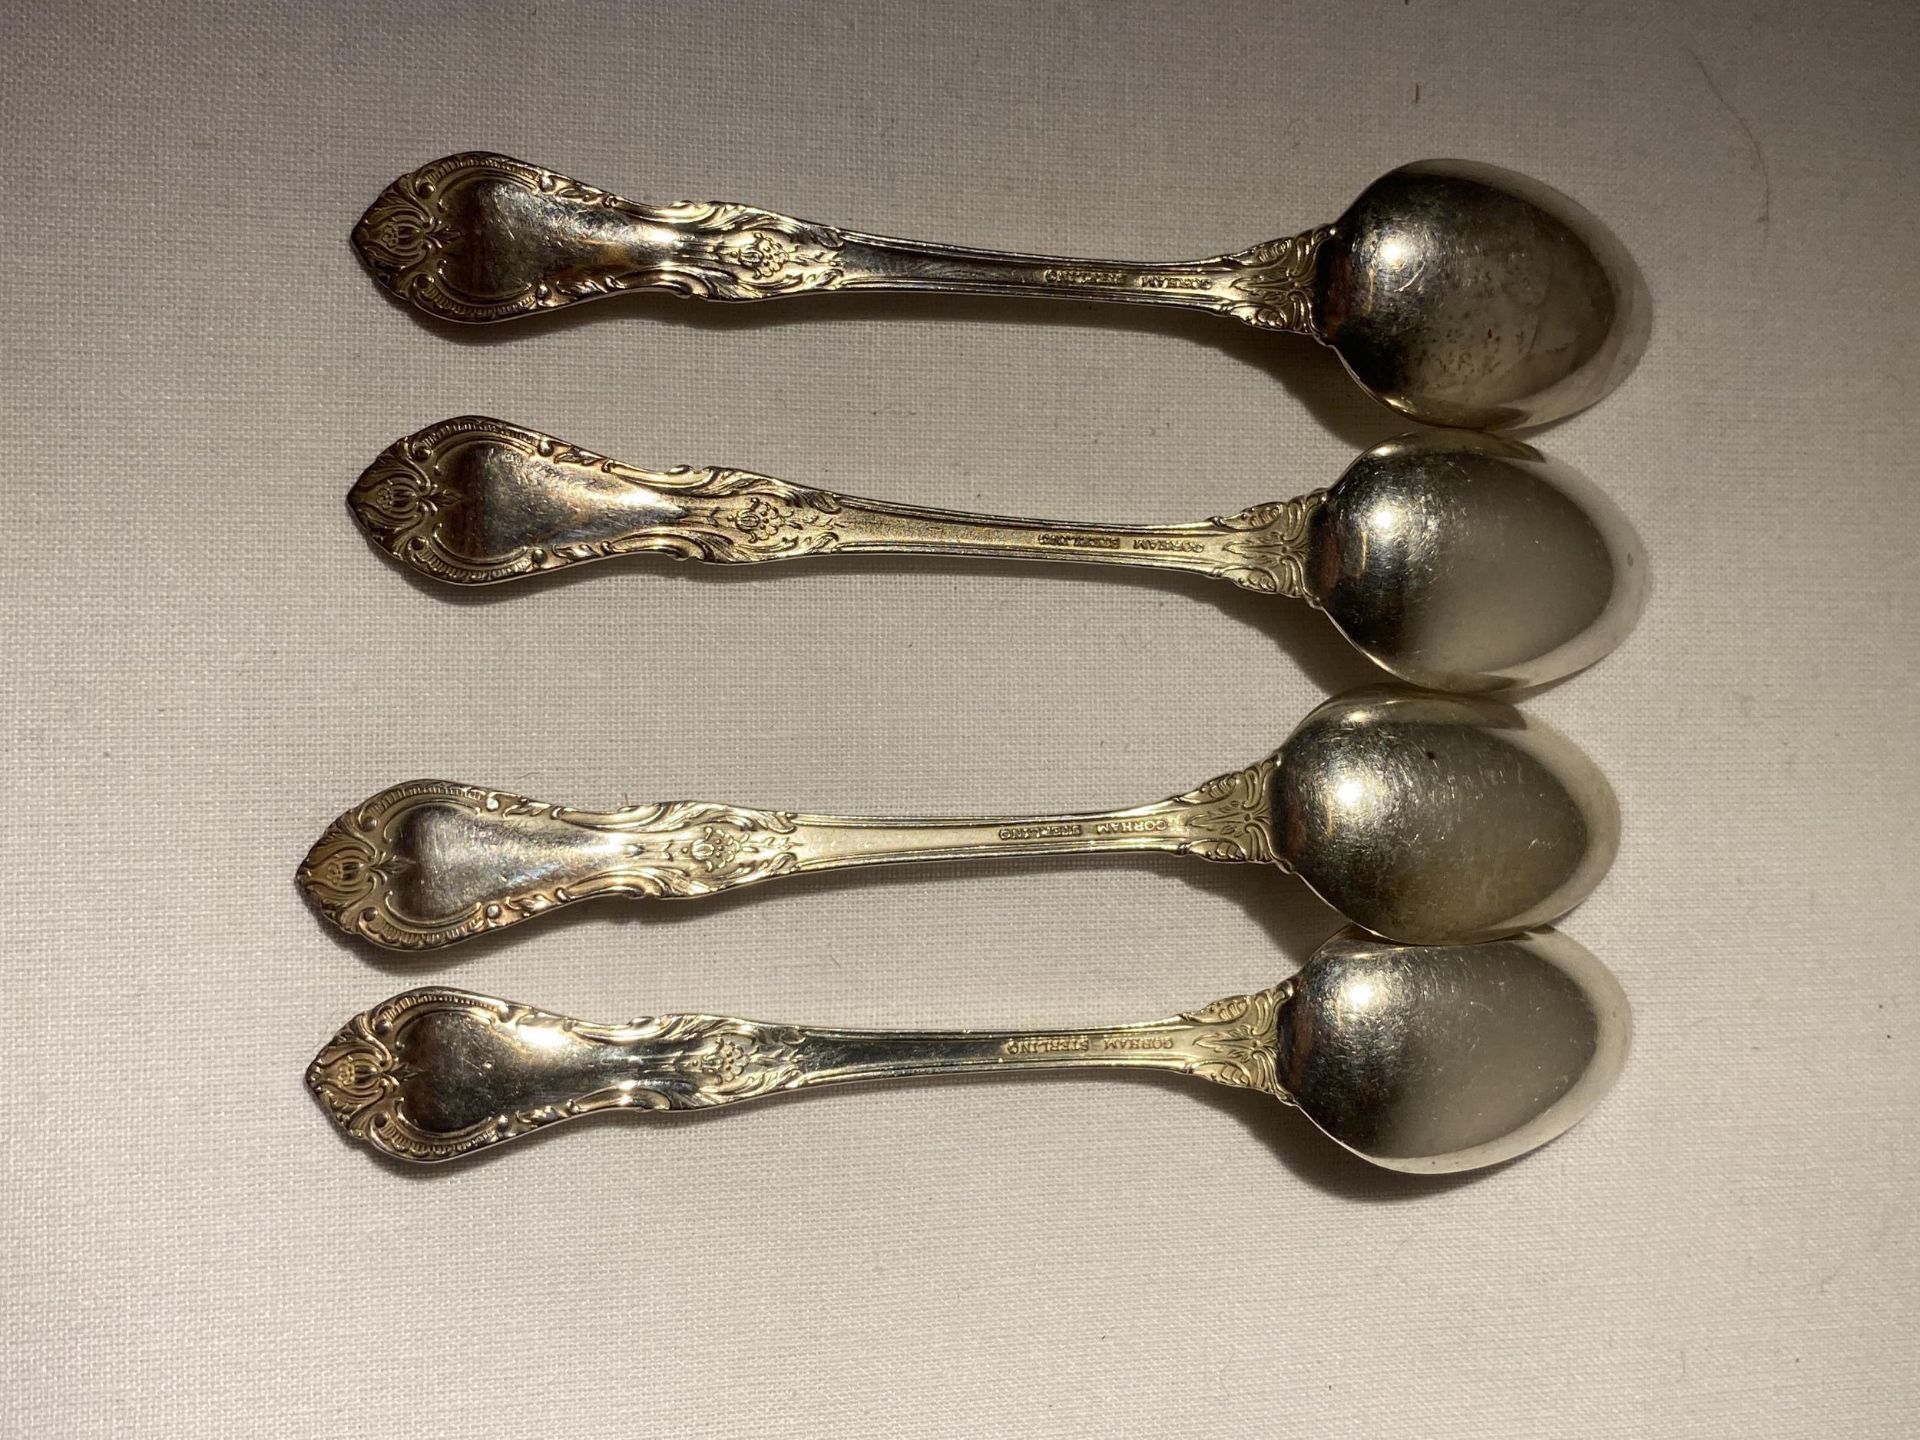 A SET OF AMERICAN GORHAM STERLING SILVER TEASPOONS, GROSS WEIGHT 46 GRAMS - Image 12 of 21